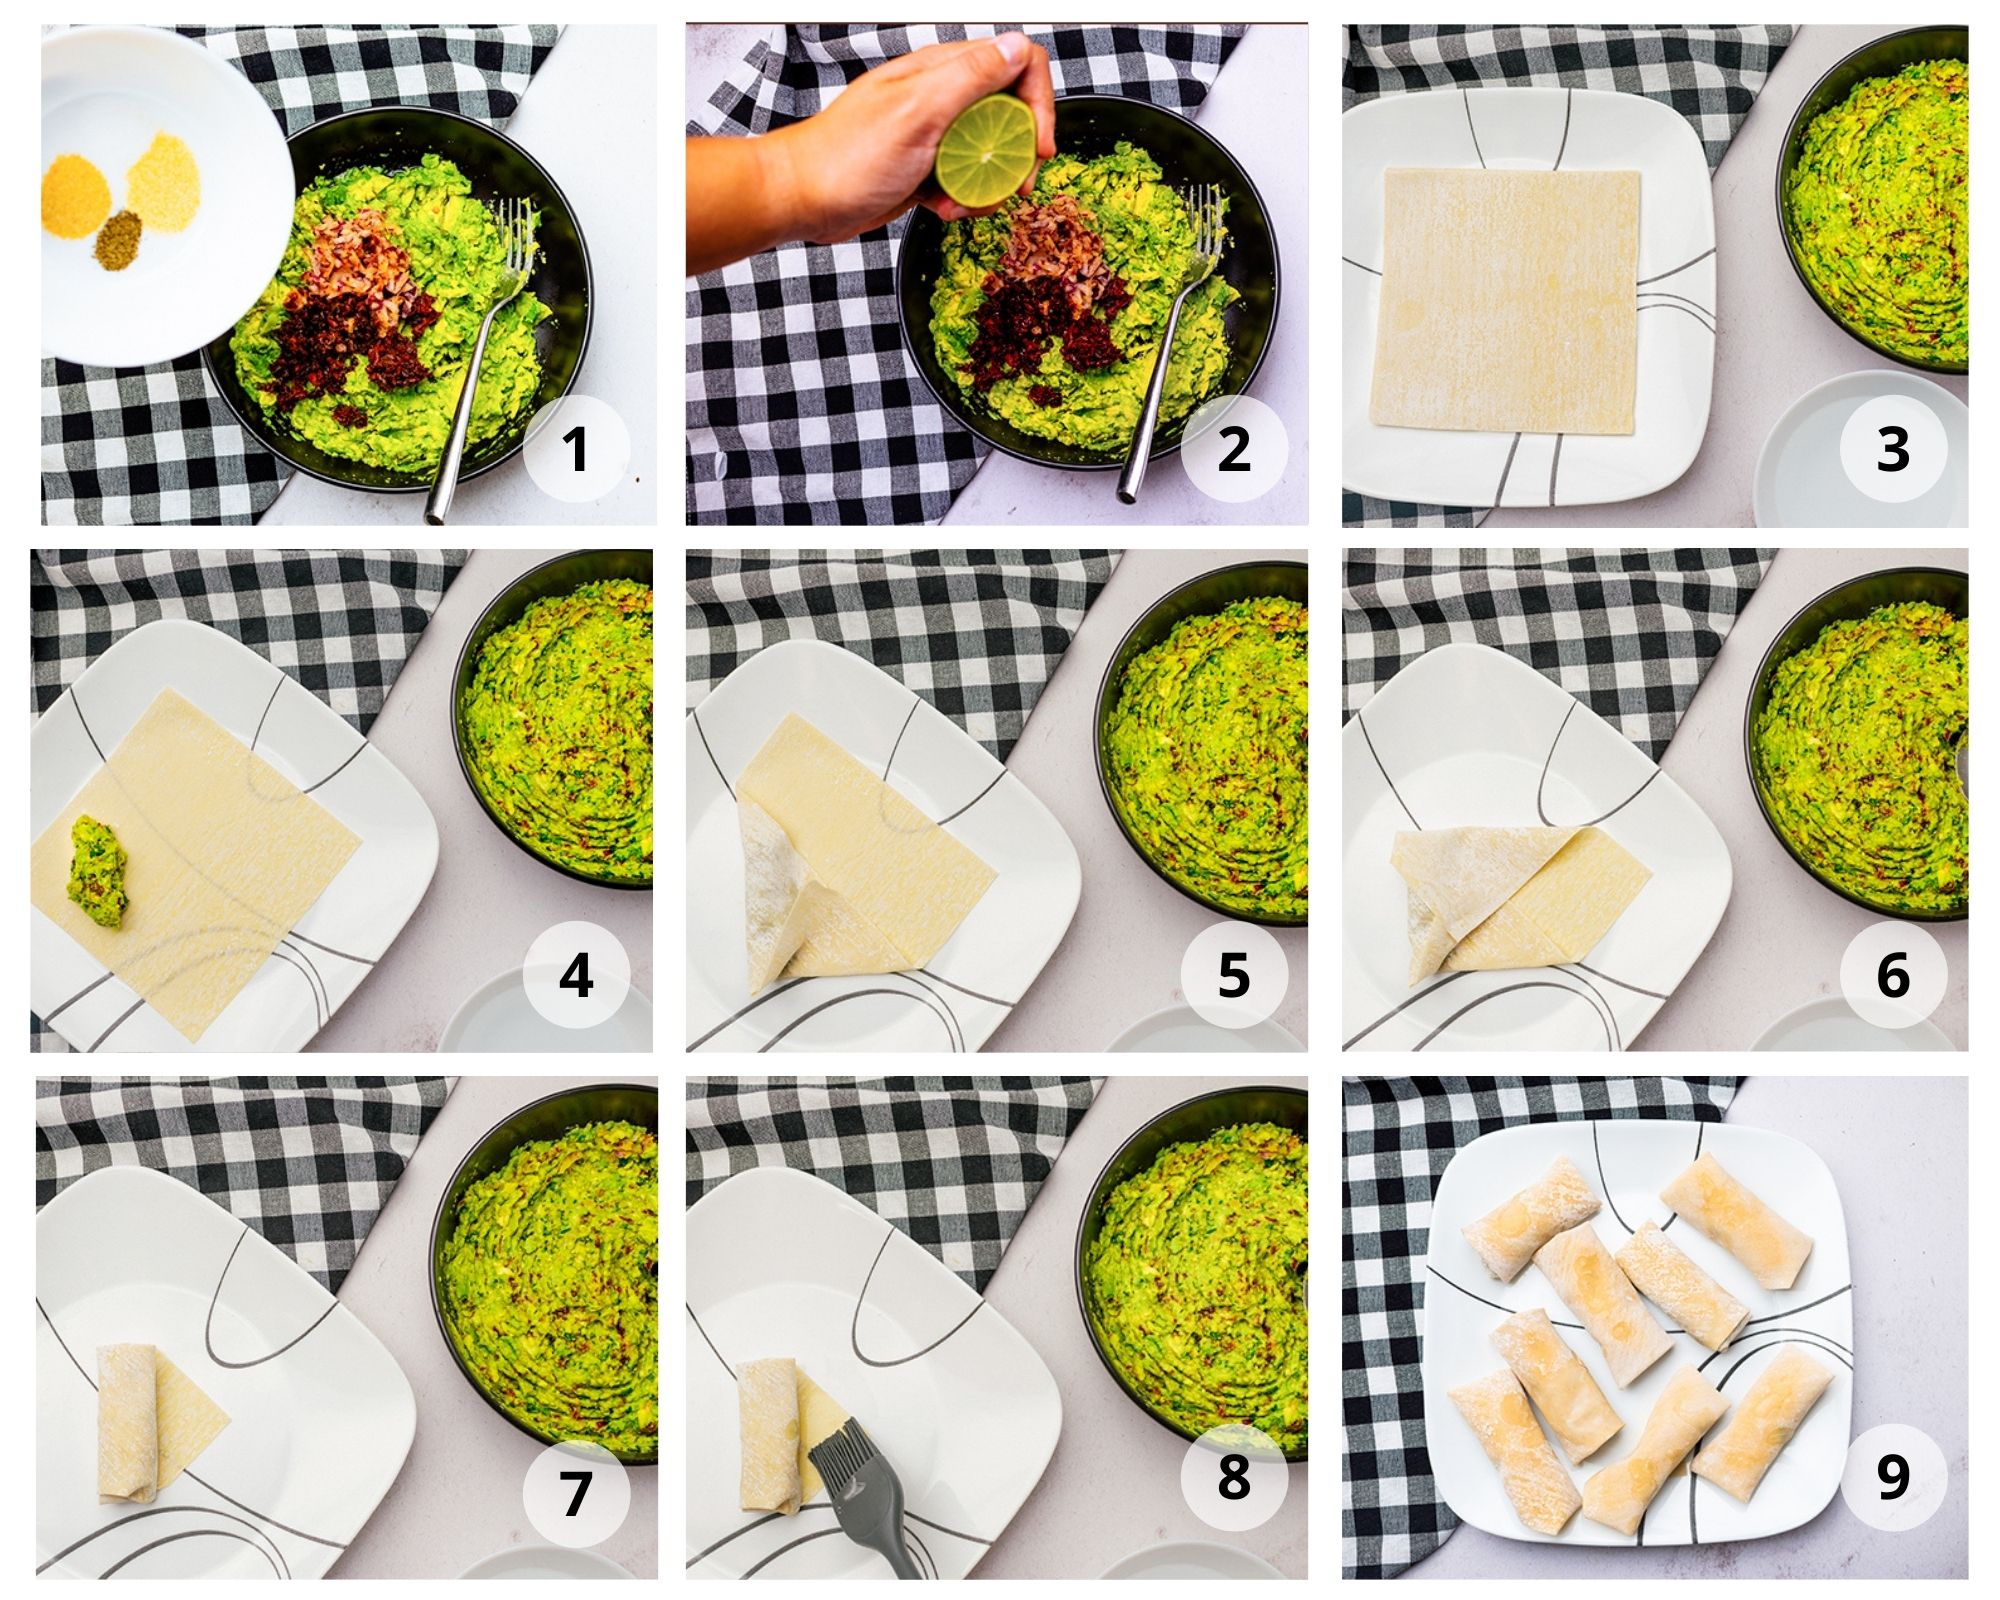 A collage of process shots showing how to make Vegan Avocado Egg Rolls in 9 steps.